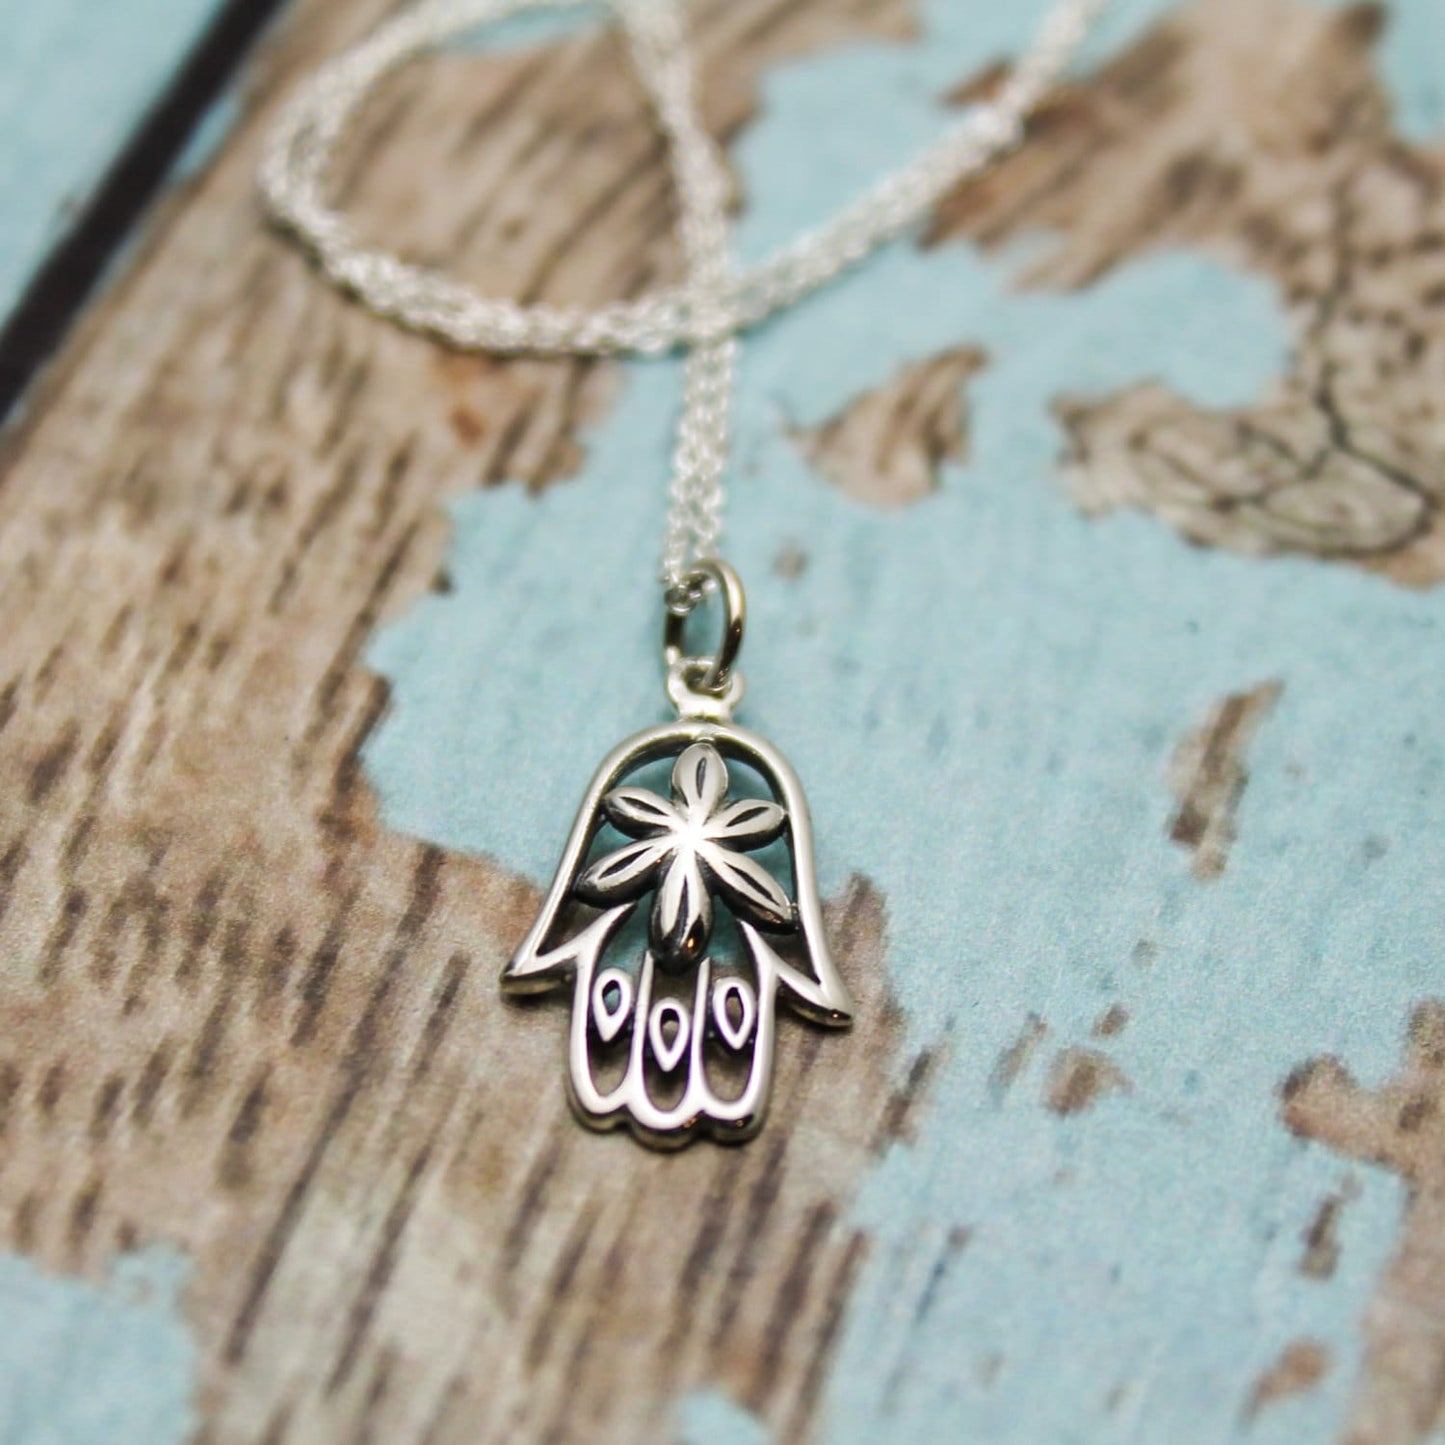 Hamsa Hand Charm Necklace in Sterling Silver